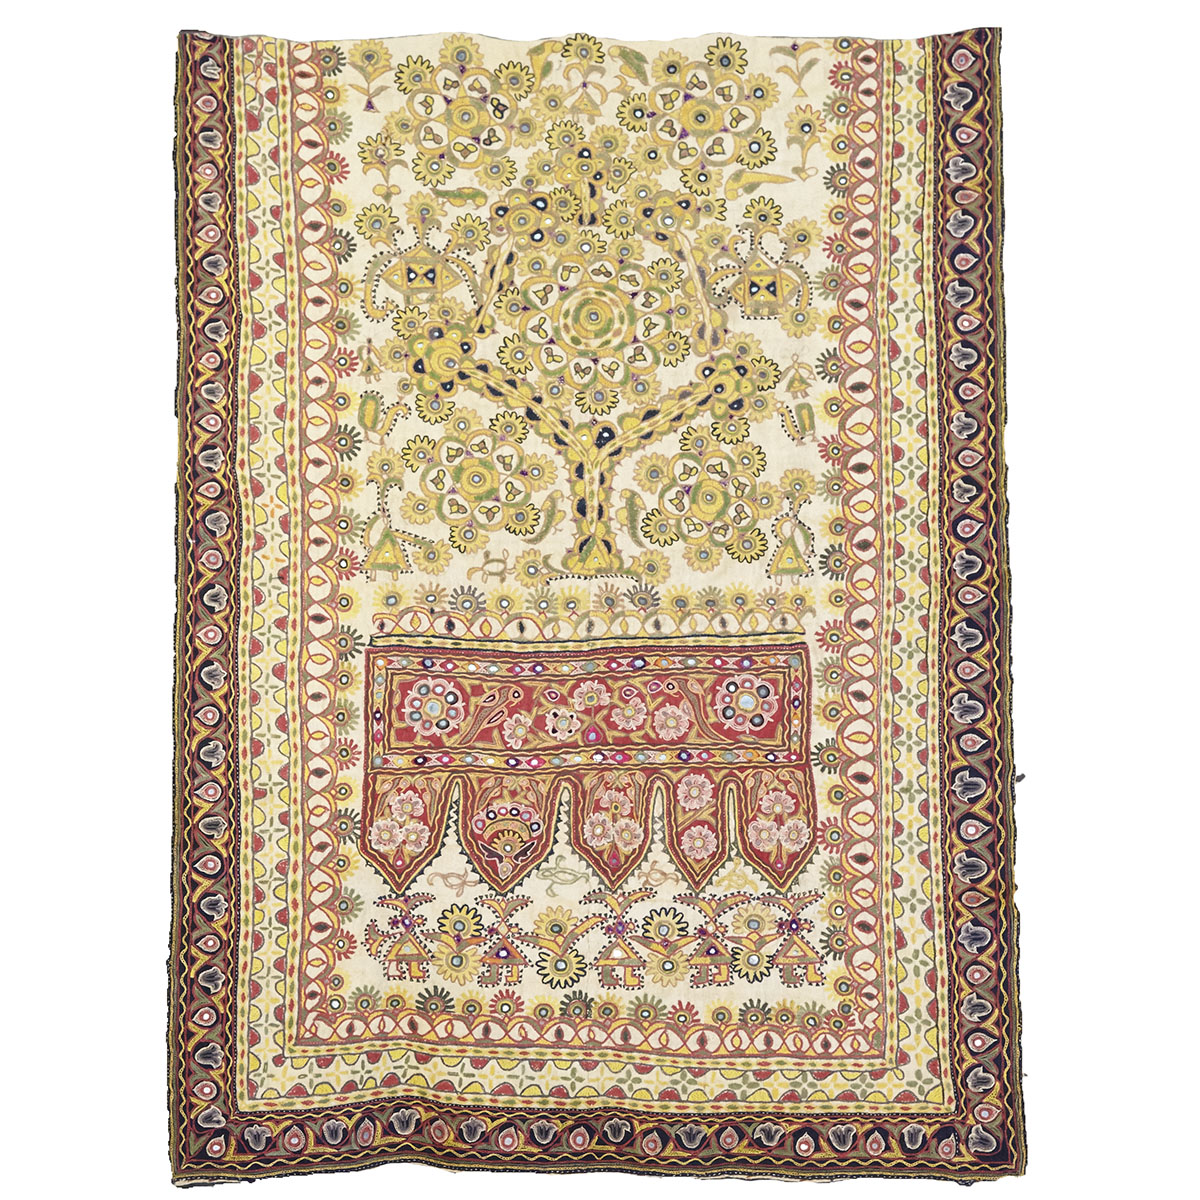 Uzbekistan Embroidery with mirrored insets, early 20th century